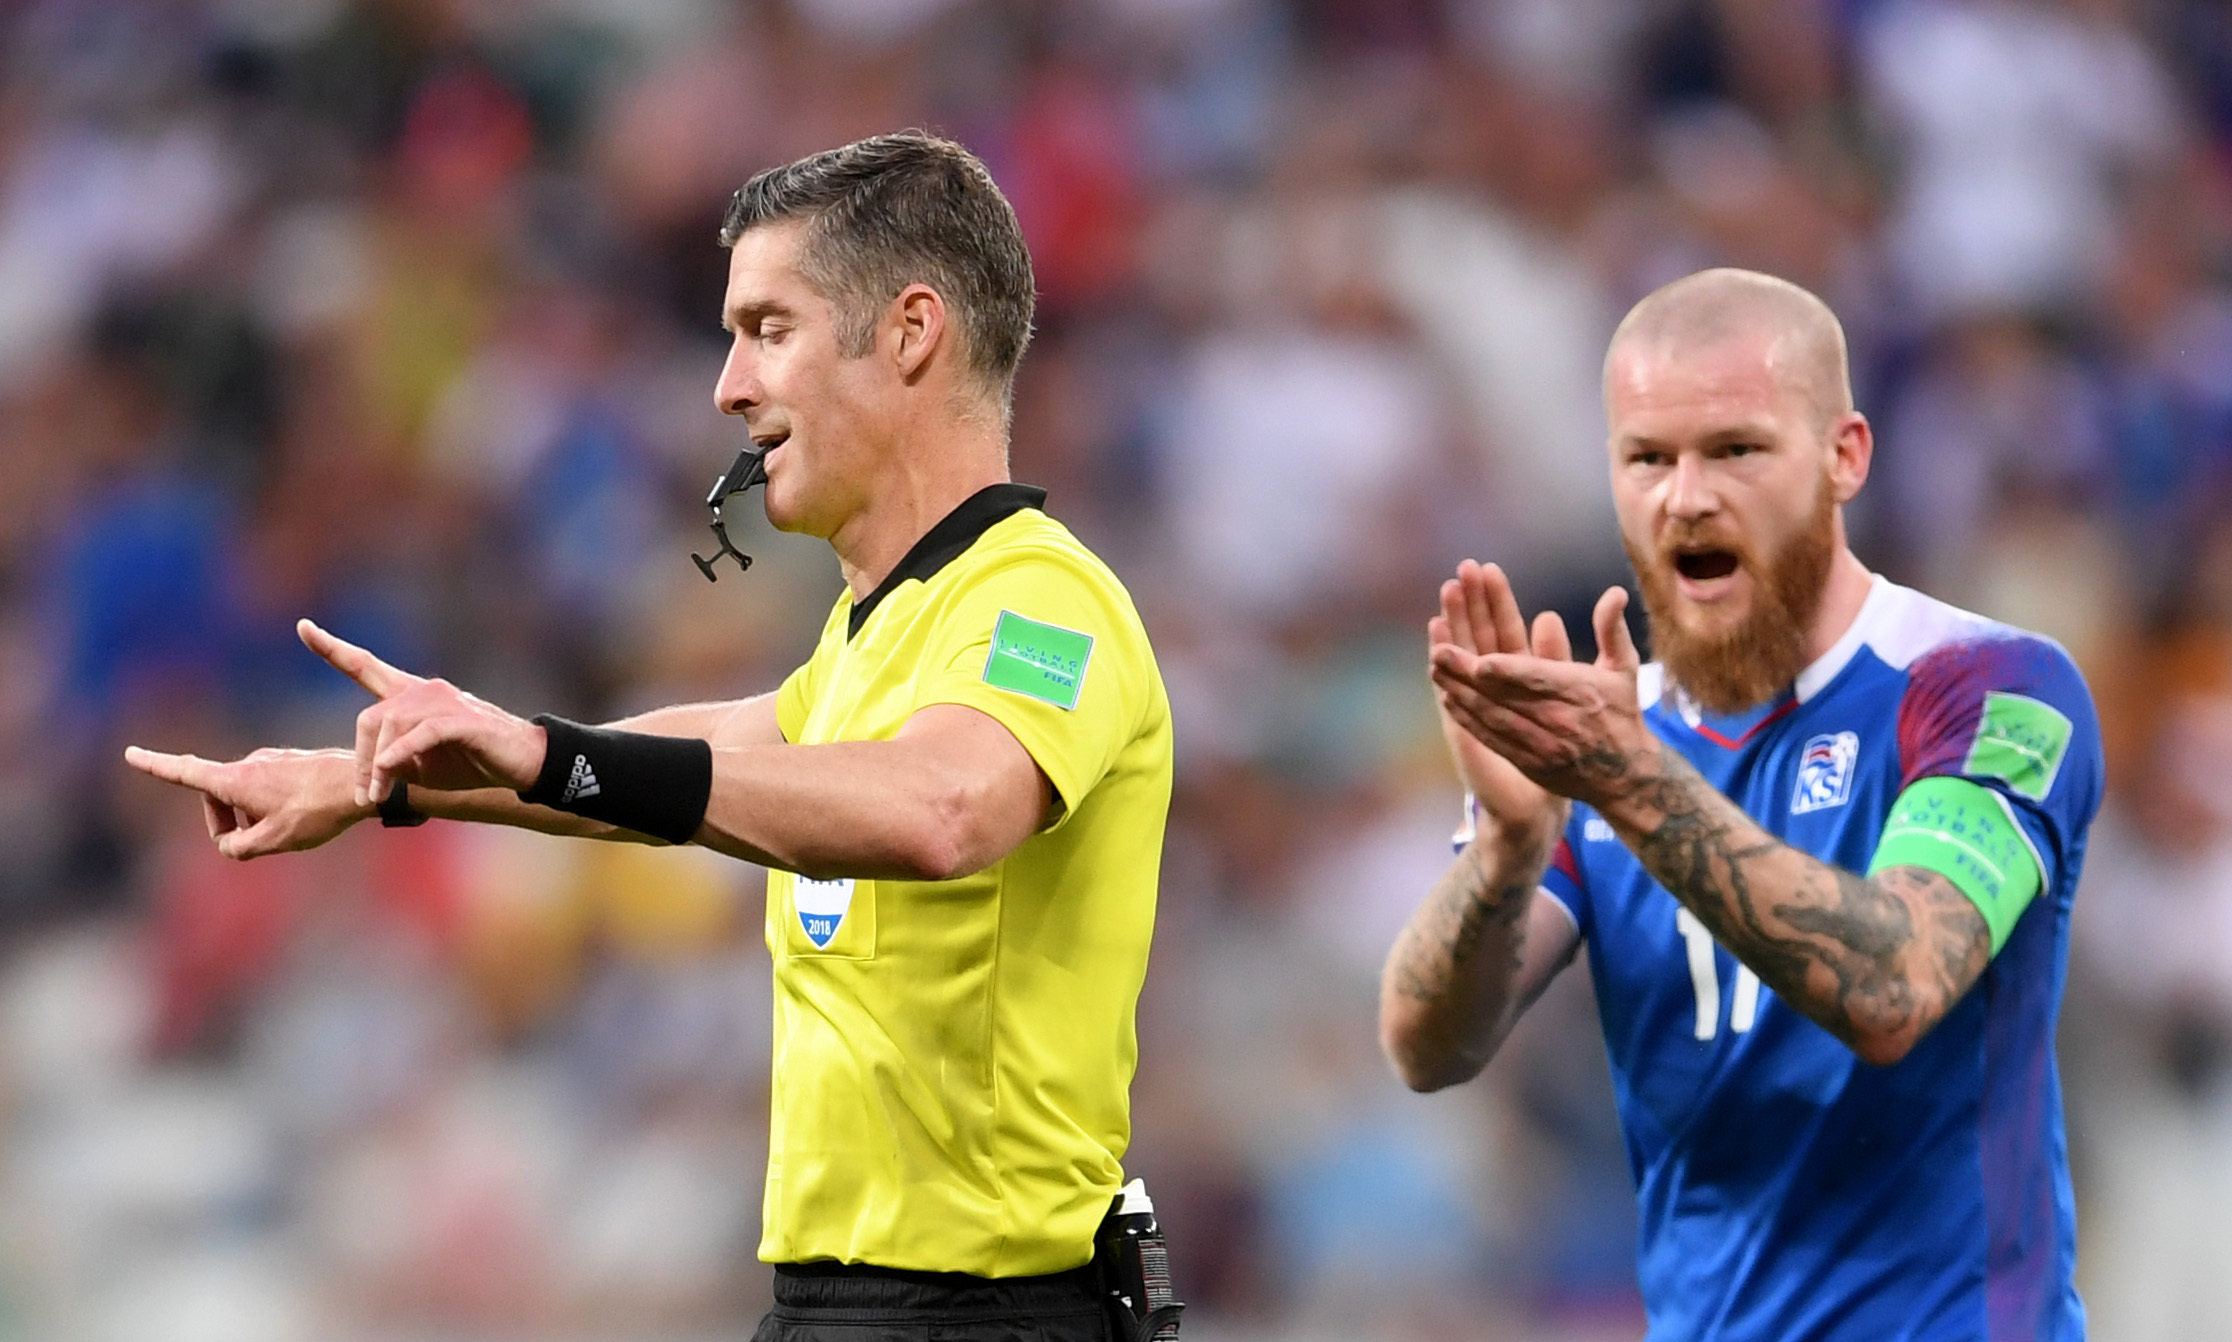 The familiar sight of a referee  signalling a VAR decision.